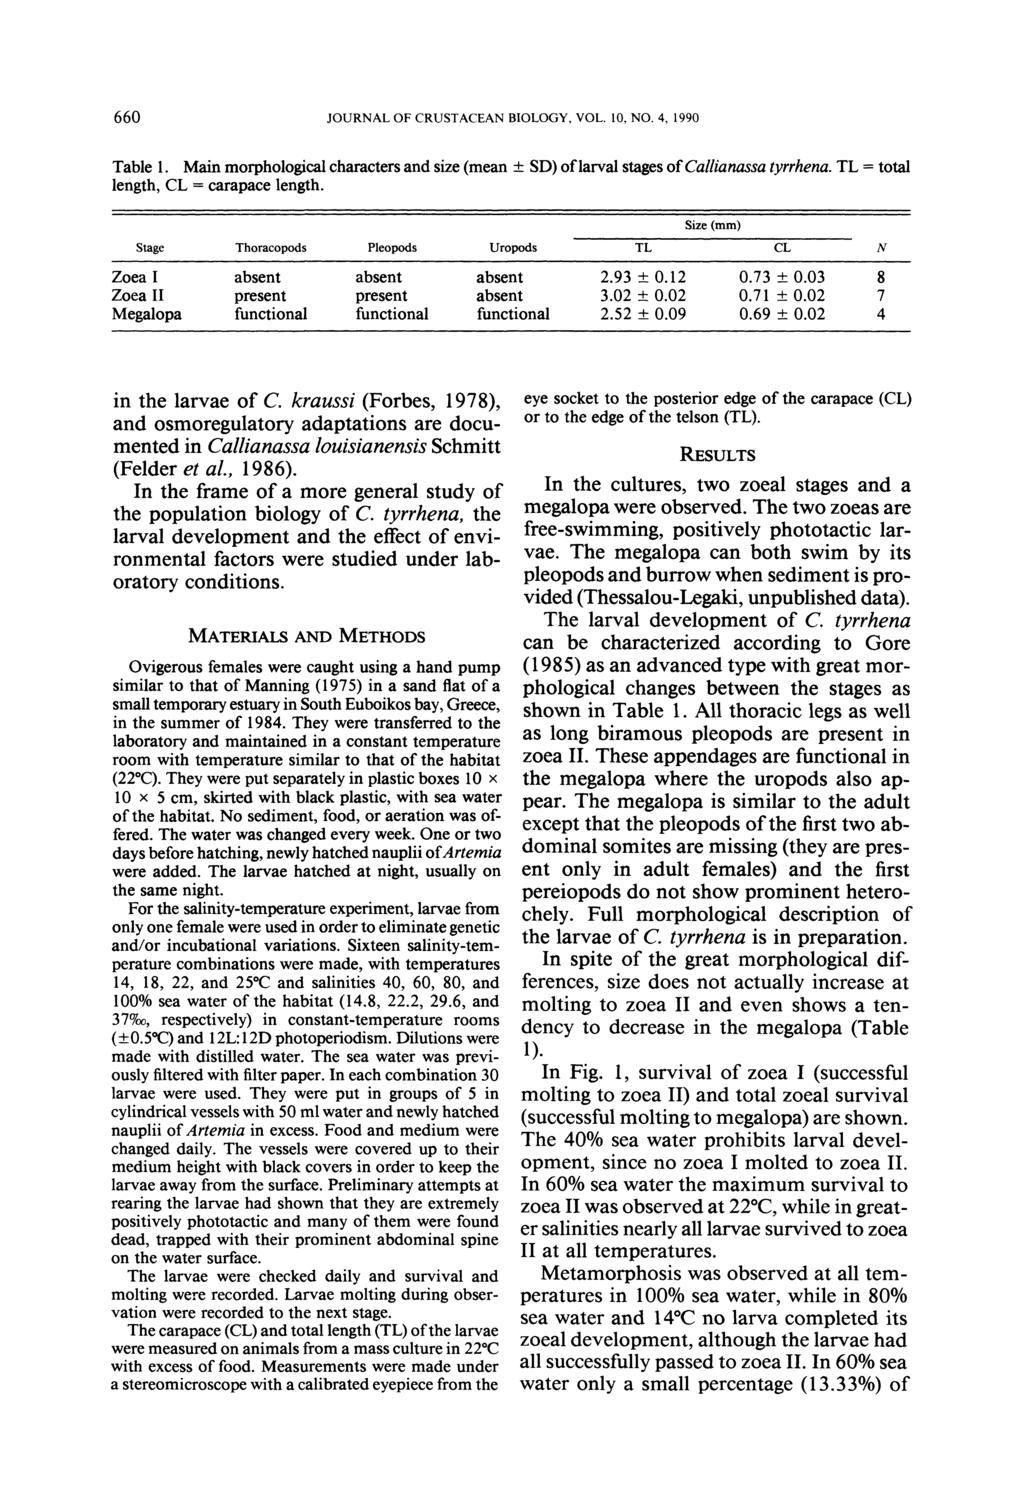 660 JOURNAL OF CRUSTACEAN BIOLOGY, VOL. 10, NO. 4, 1990 Table 1. Main morphological characters and size (mean ± SD) of larval stages of Callianassa tyrrhena. TL = total length, CL = carapace length.